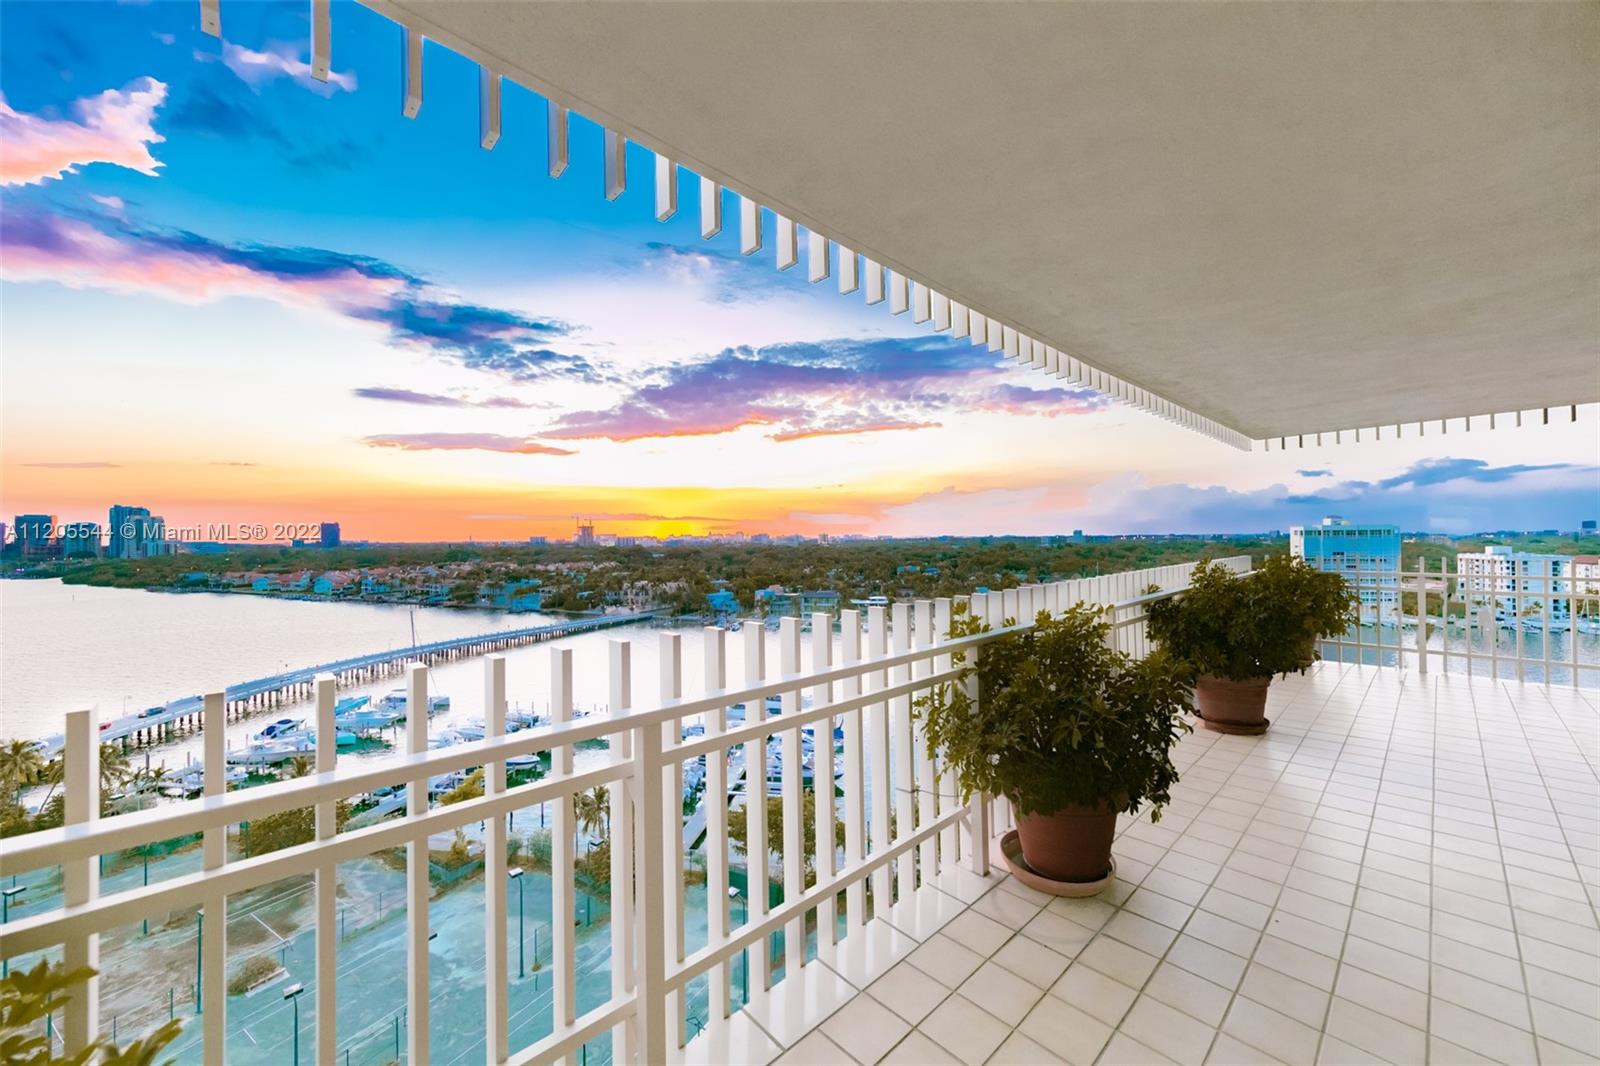 Live on the only tropical private island in Coconut Grove, enjoy the best sunrise and sunsets in this fabulous 2,424 SQ. FT.  3 bedroom, 2 1/2 bath condo on the 14th floor. Spacious living area, large bedrooms, great balcony with unobstructed views of the bay and Miami’s skyline!!. Don't miss this unit, easy to show.